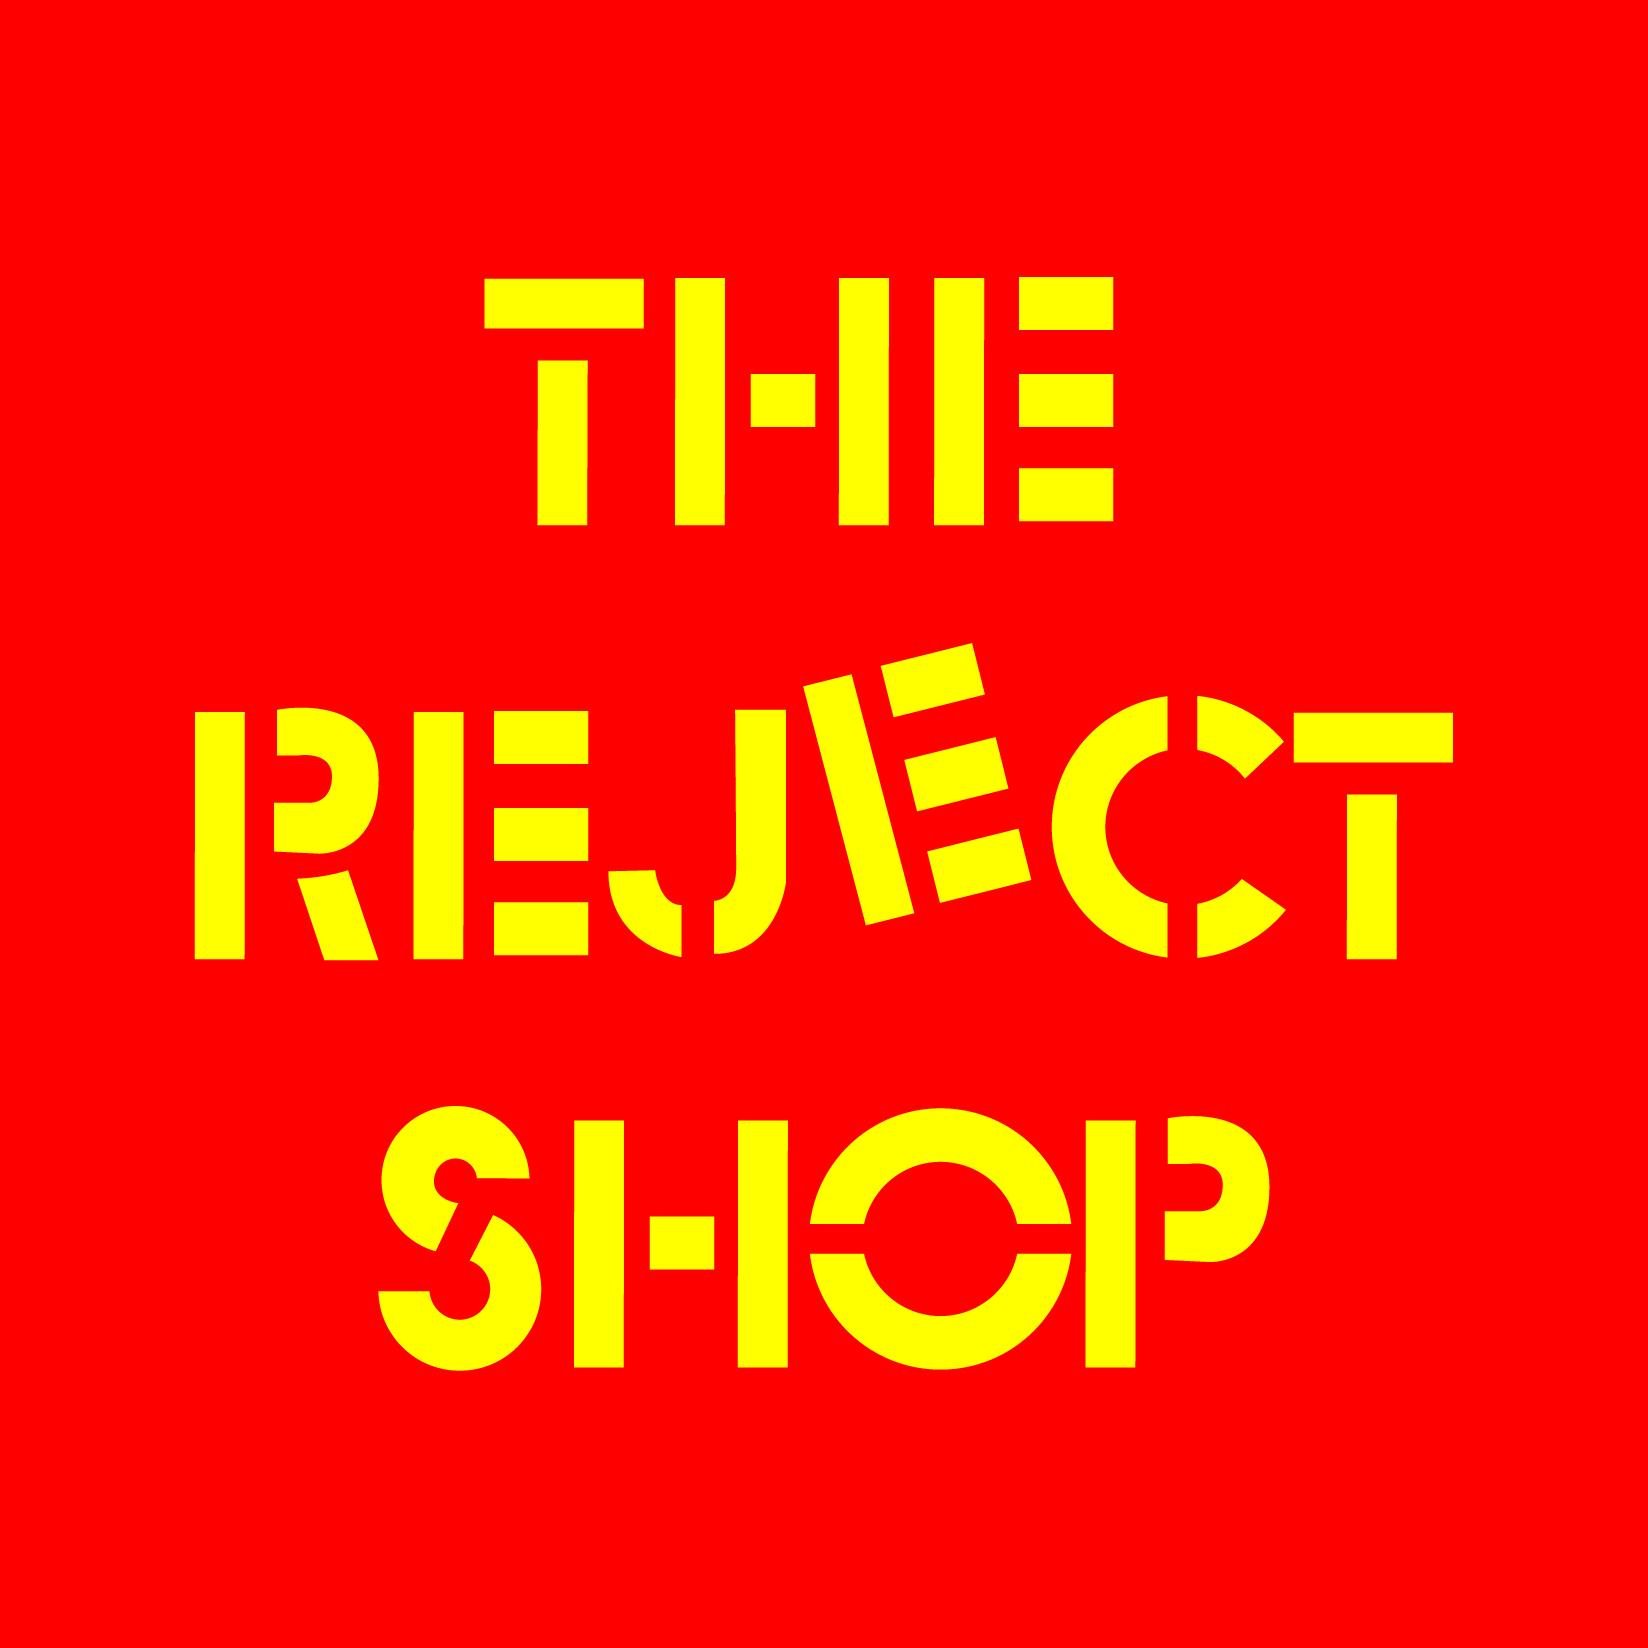 THE REJECT SHOP LIMITED